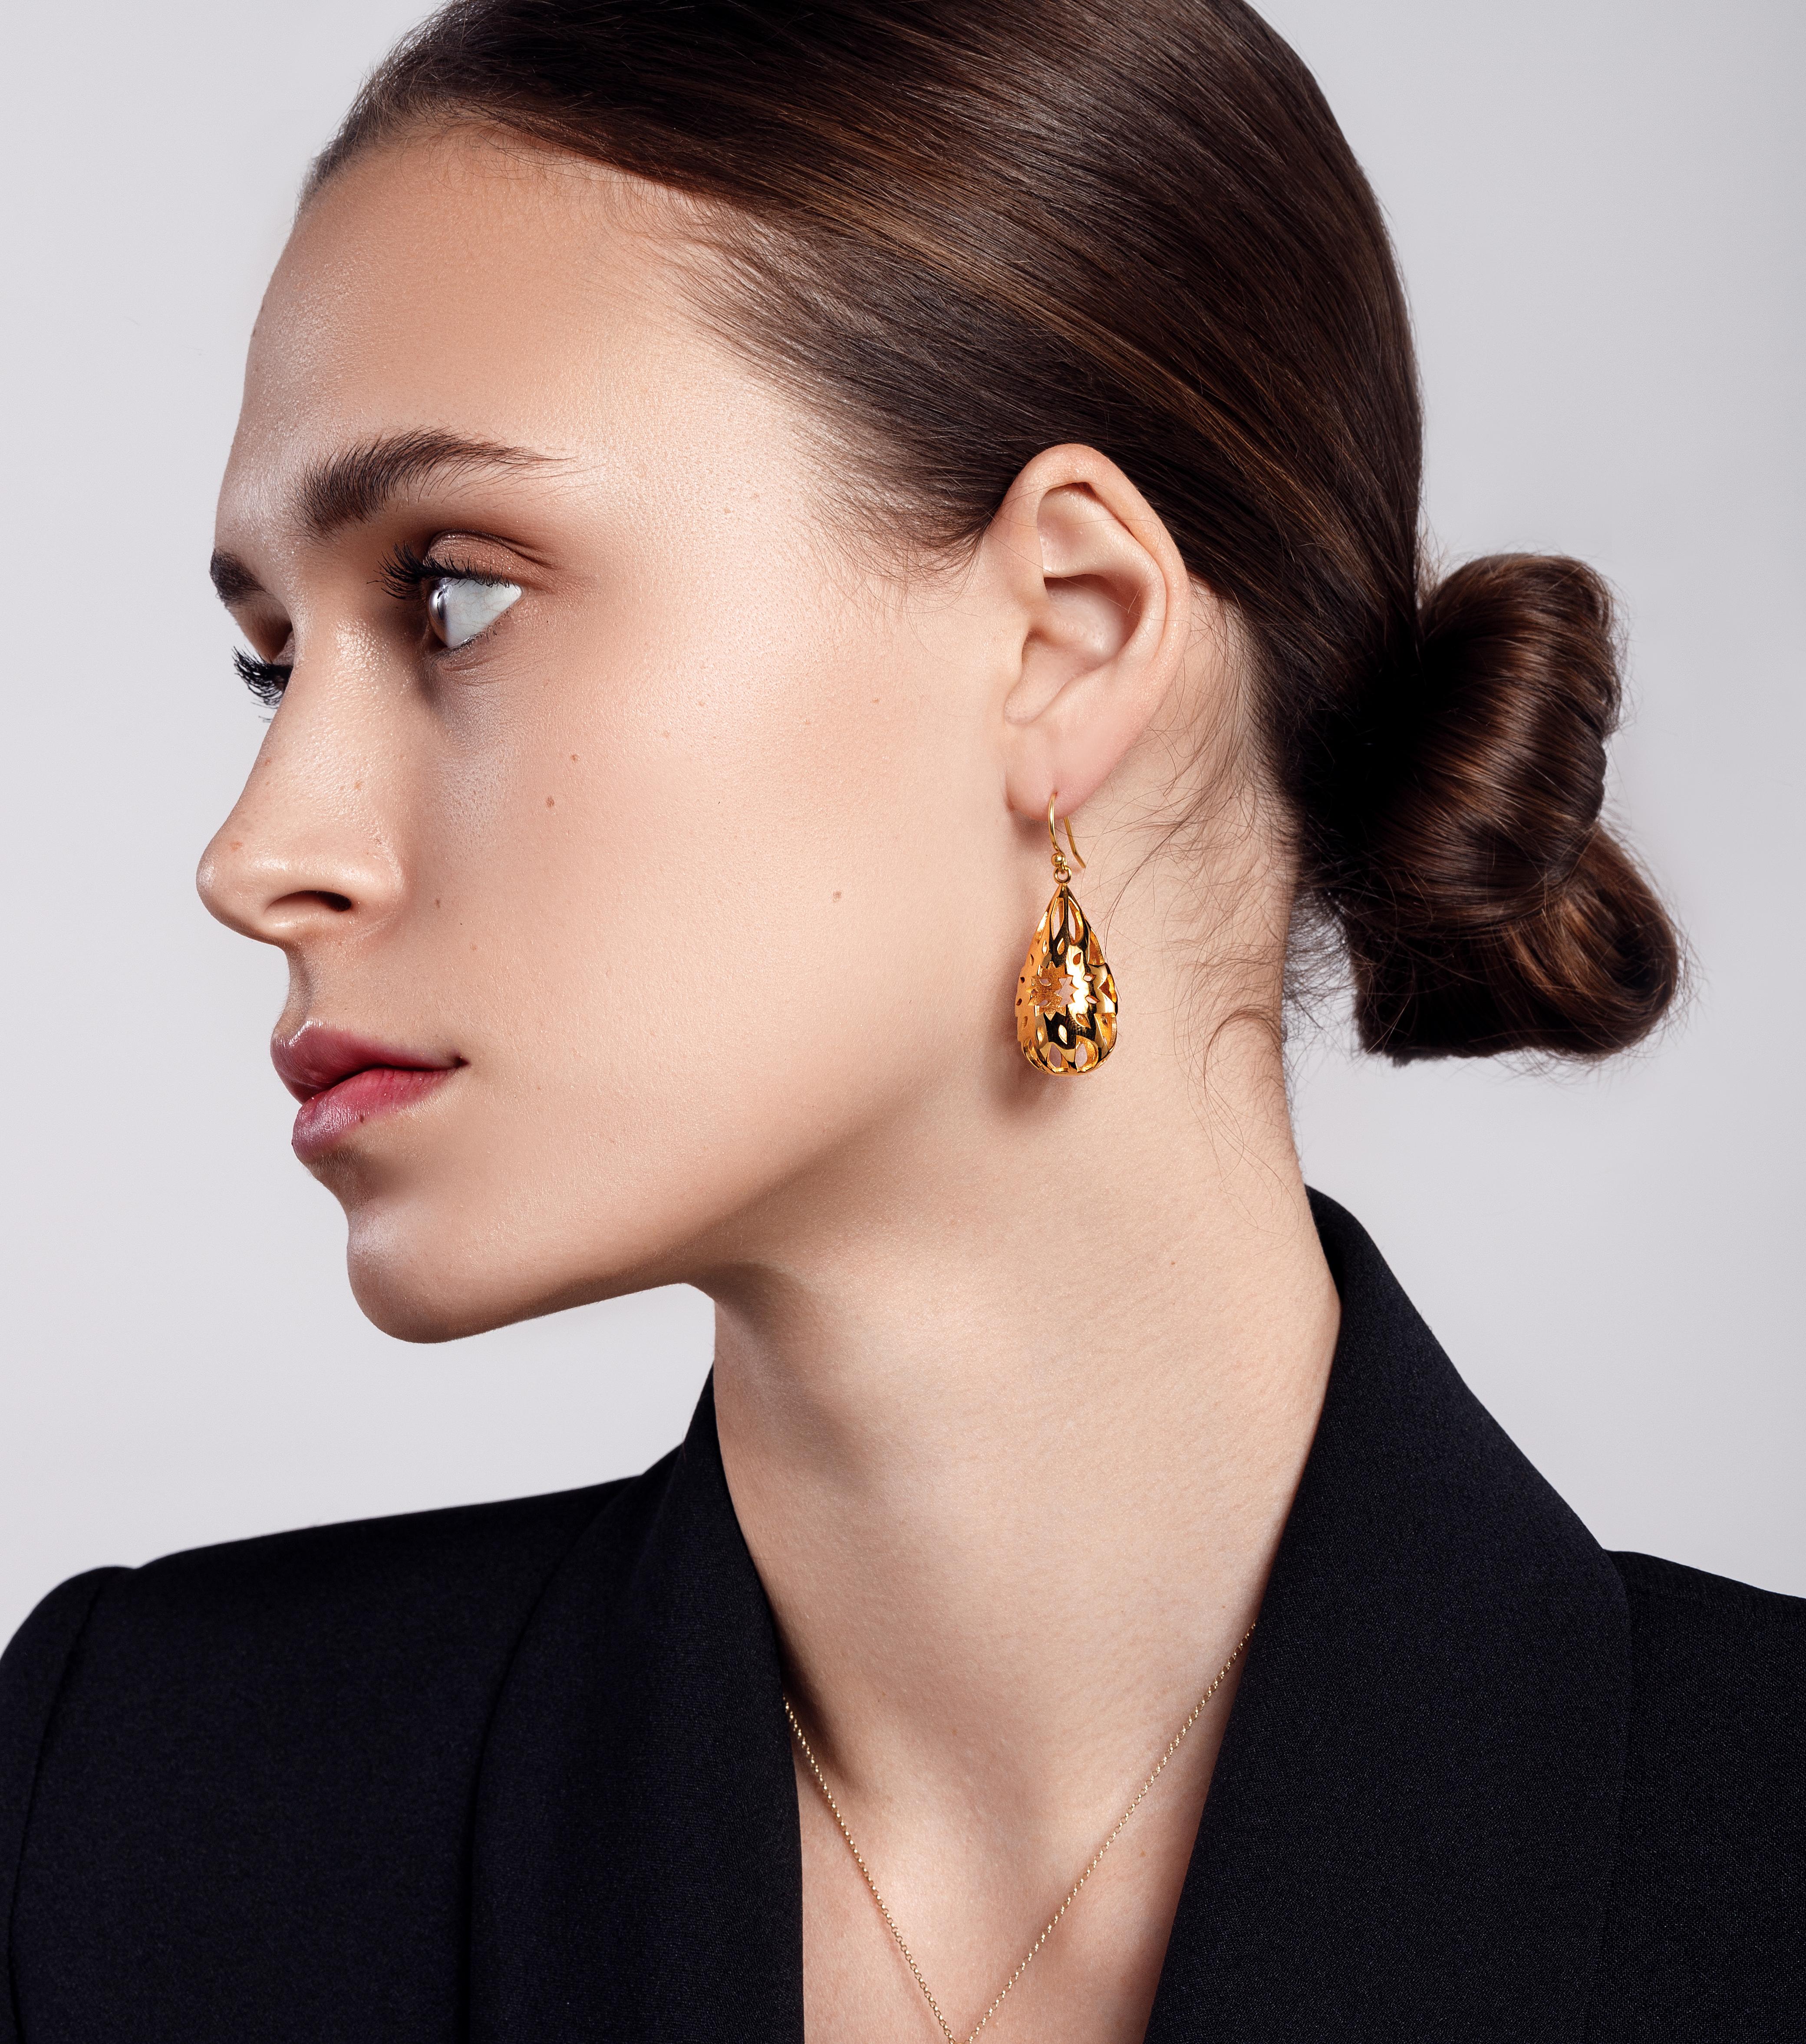 Moshabak drop earrings in 18K solid yellow gold were designed by Sanaz Doost, Designer and founder of Sanaz Doost jewelry; inspired by ancient middle eastern art & architecture. These modern, timeless and sensual earrings are lightweight & very